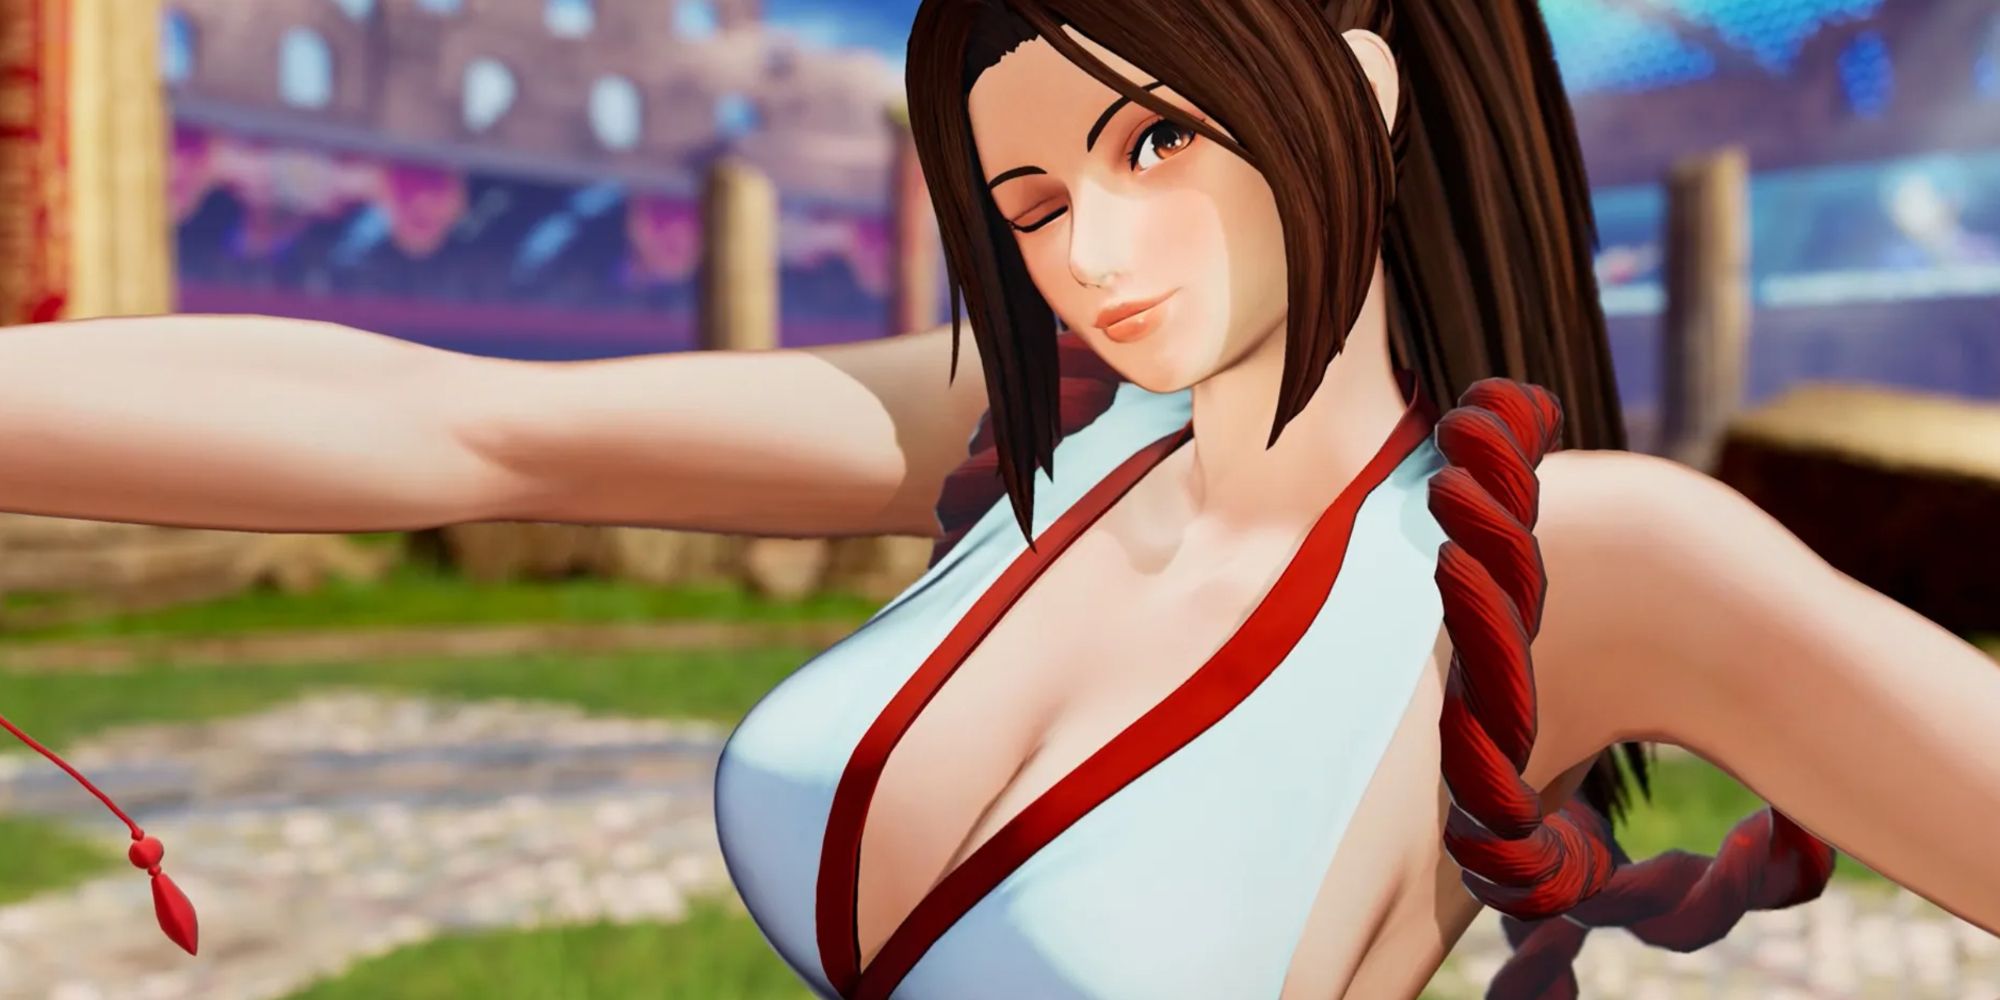 Mai Shiranui from The King of Fighters 15